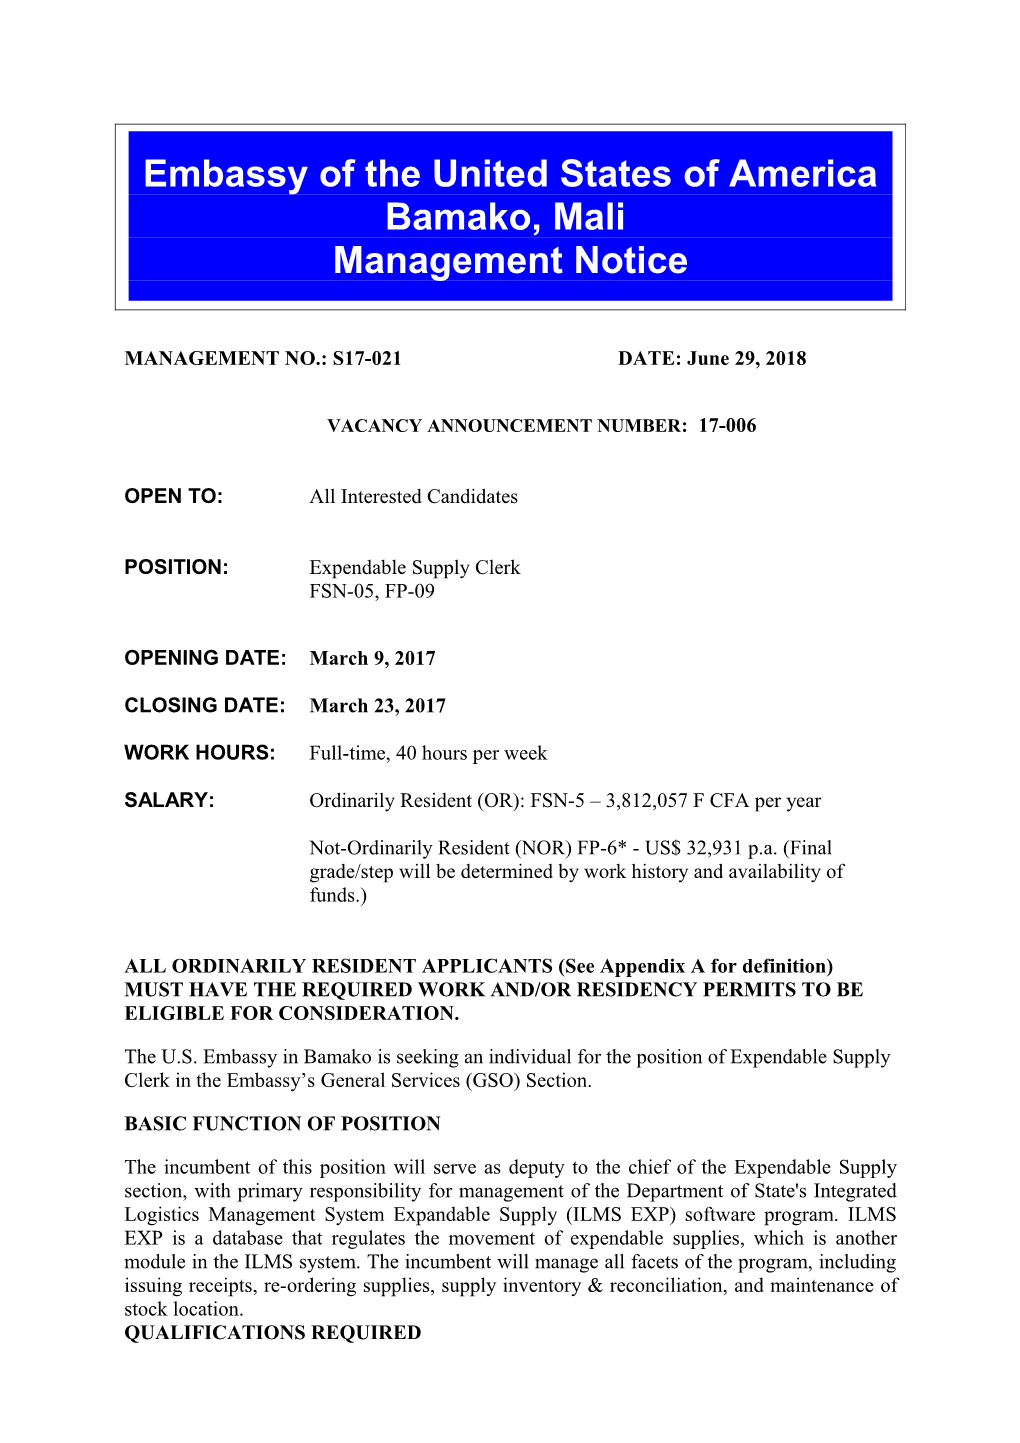 MANAGEMENT NO.: S17-021 DATE: March 9, 2017